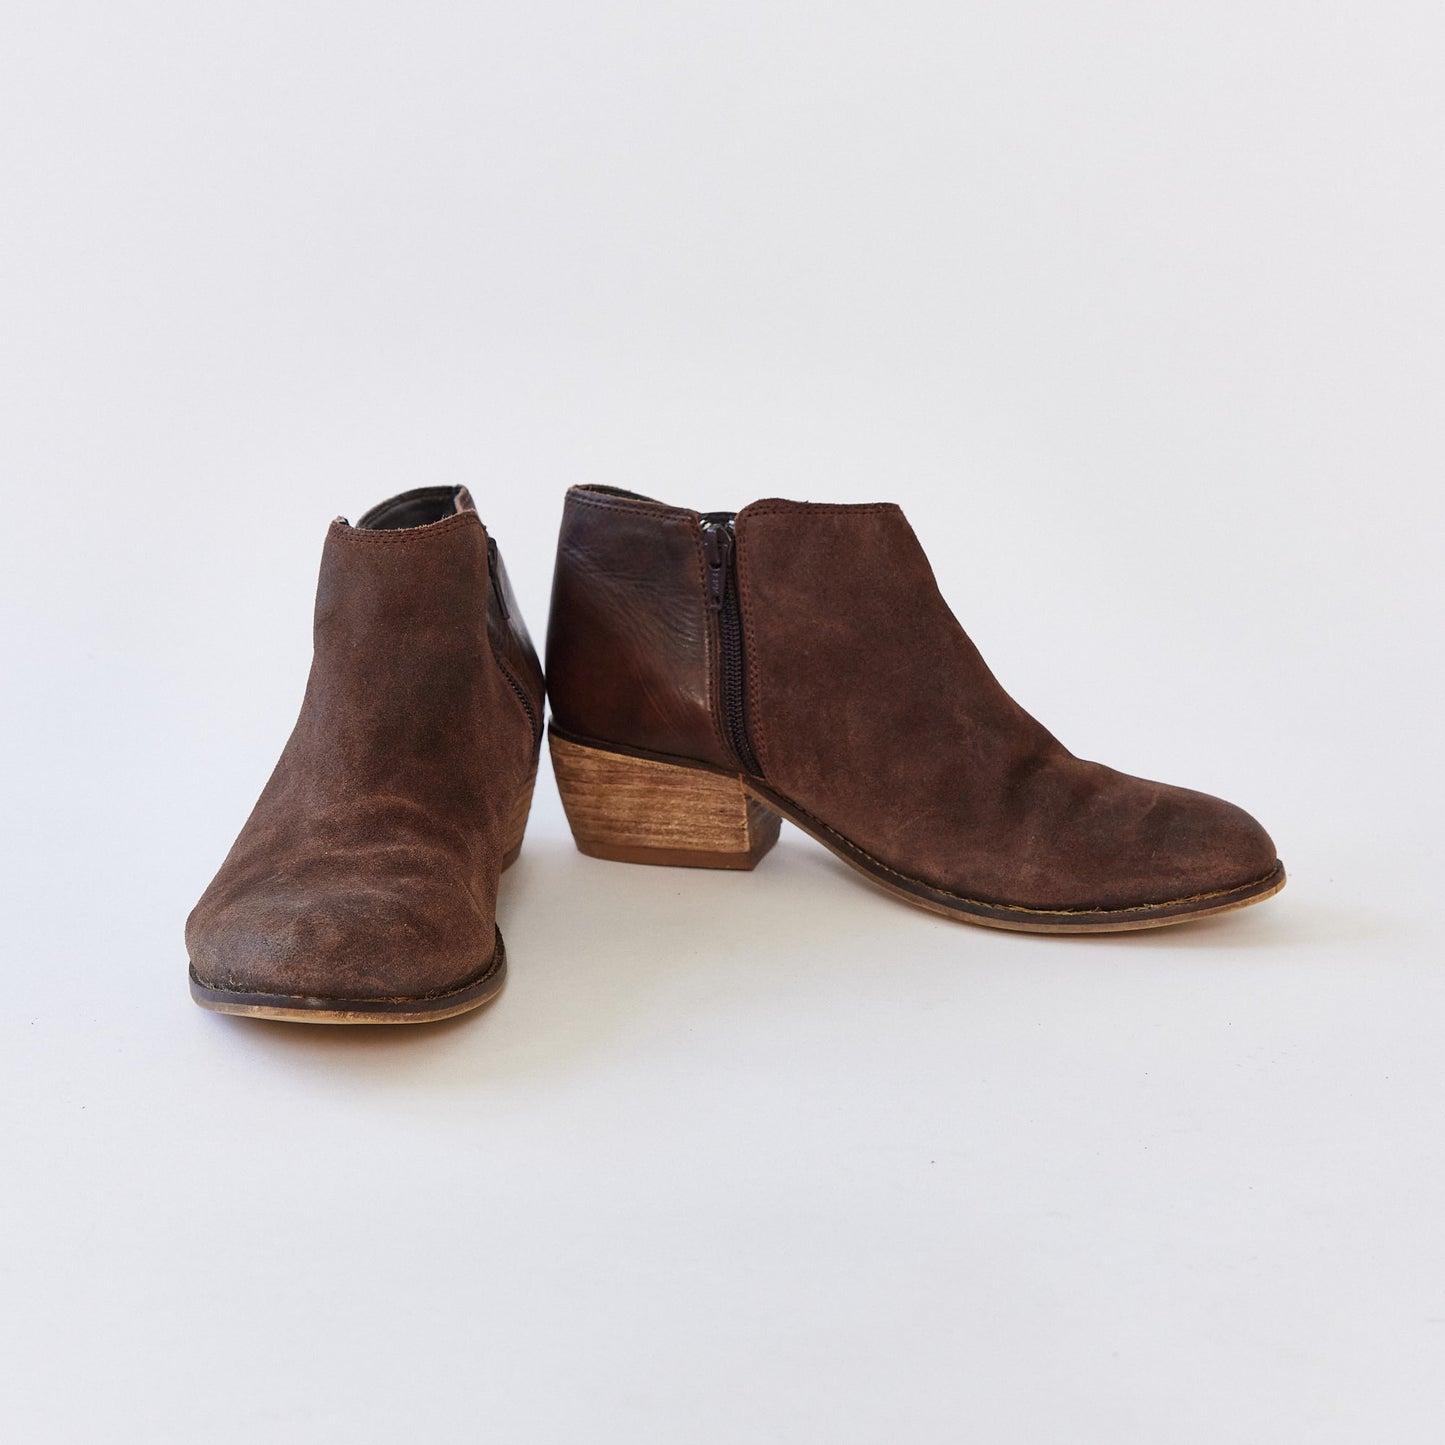 Brown suede Ankle boot size 5